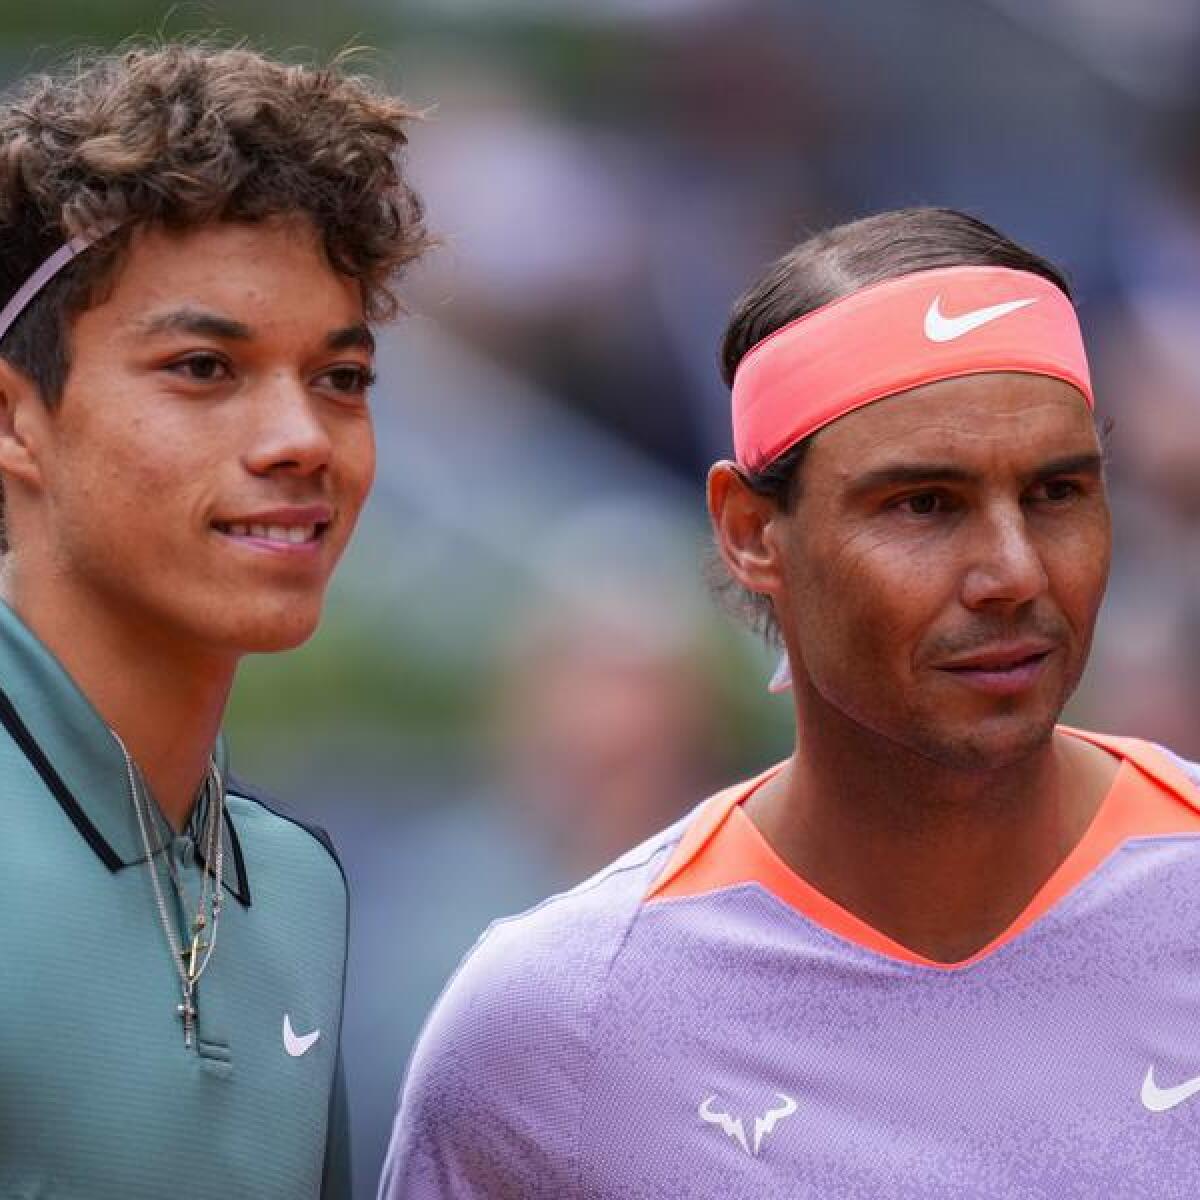 Rafa Nadal and 16-year-old youngster